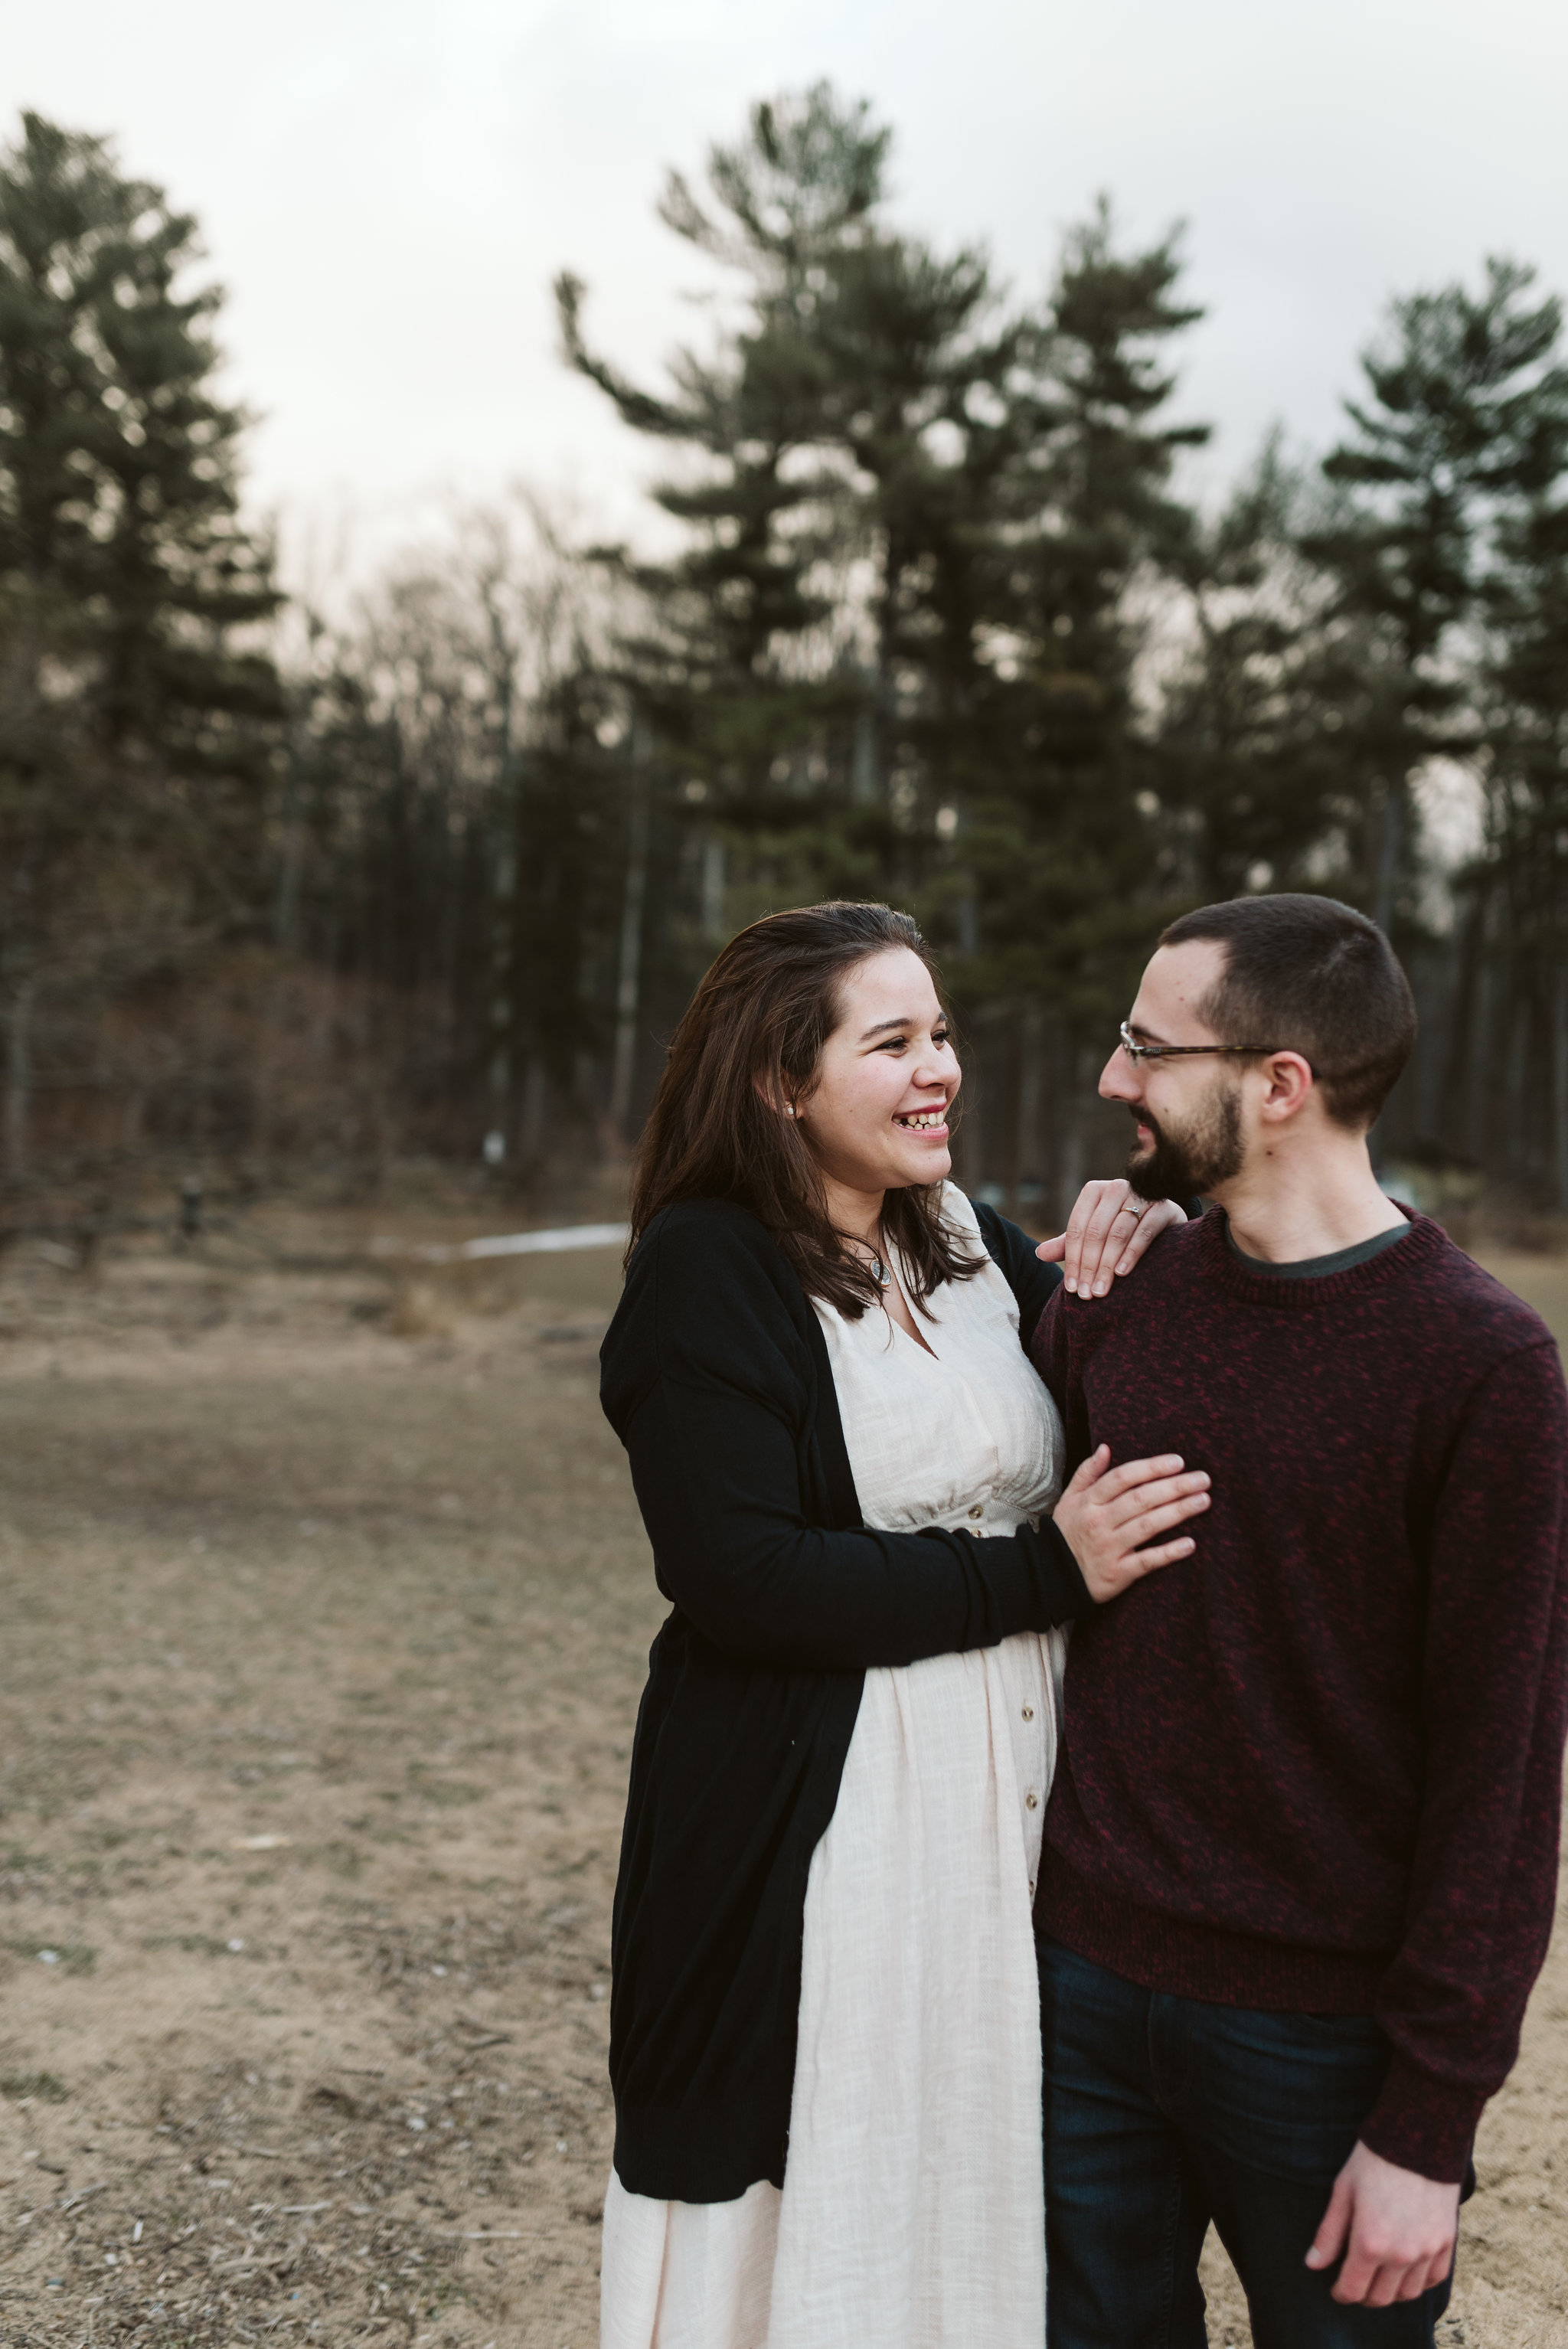  Baltimore County, Loch Raven Reservoir, Maryland Wedding Photographer, Winter, Engagement Photos, Nature, Romantic, Clean and Classic, Couple Laughing Together in the Forest 